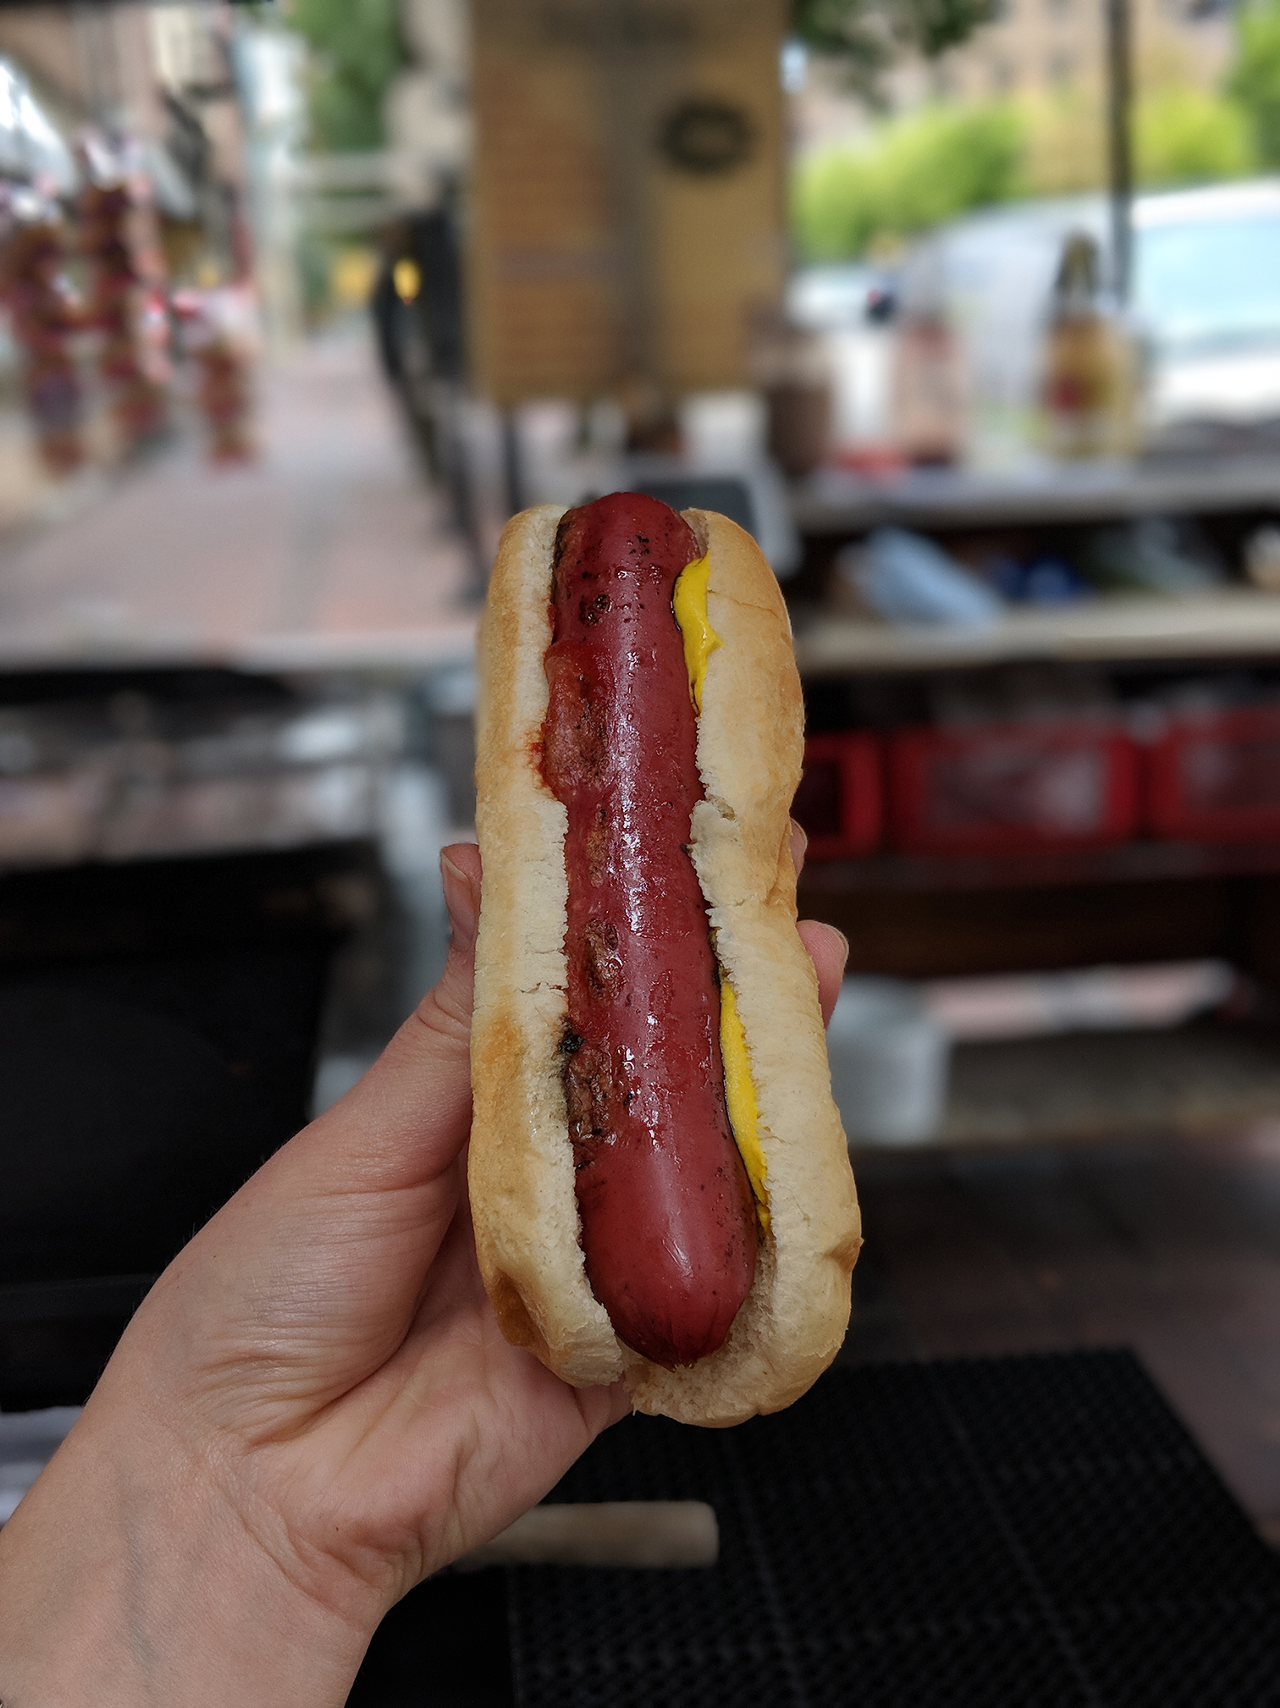 A classic Avril dog with mustard and ketchup. Restaurants ranging from Senate to Zip's to Izzy's use Avril-Bleh meats.